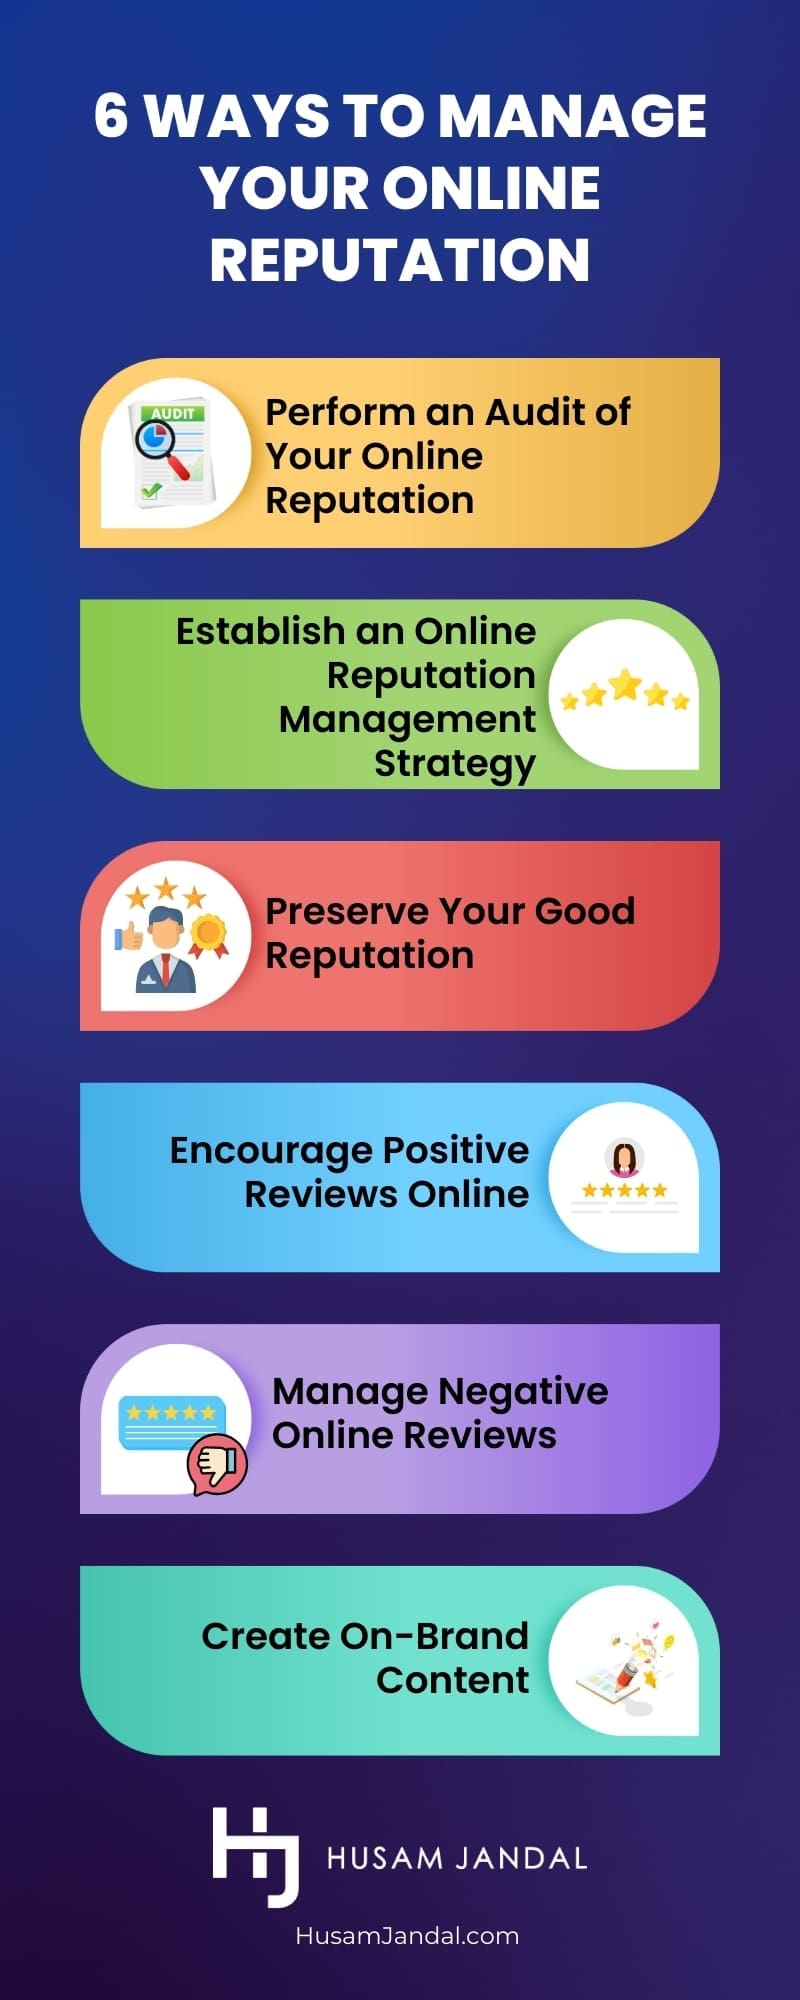 6 Ways to manage your online reputation